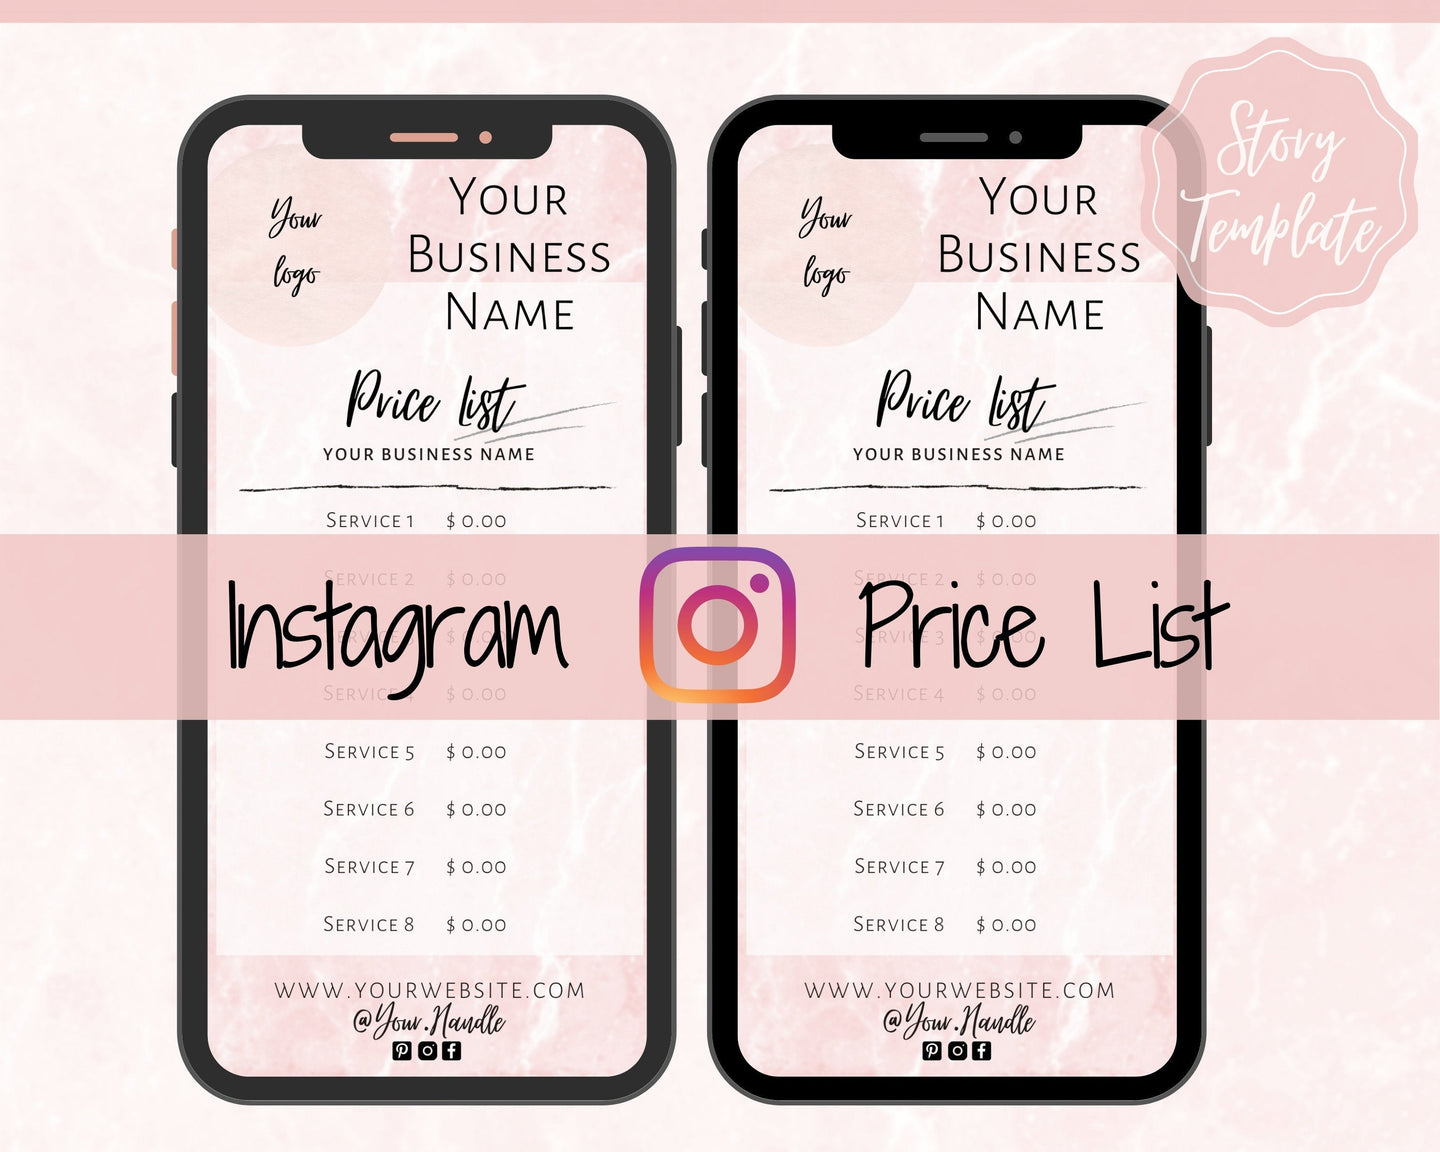 Instagram Template PRICE LIST Instagram Story! Price List Template for your feed, IG Stories, Highlights. Instagram Marketing, Social Media | Pink Marble